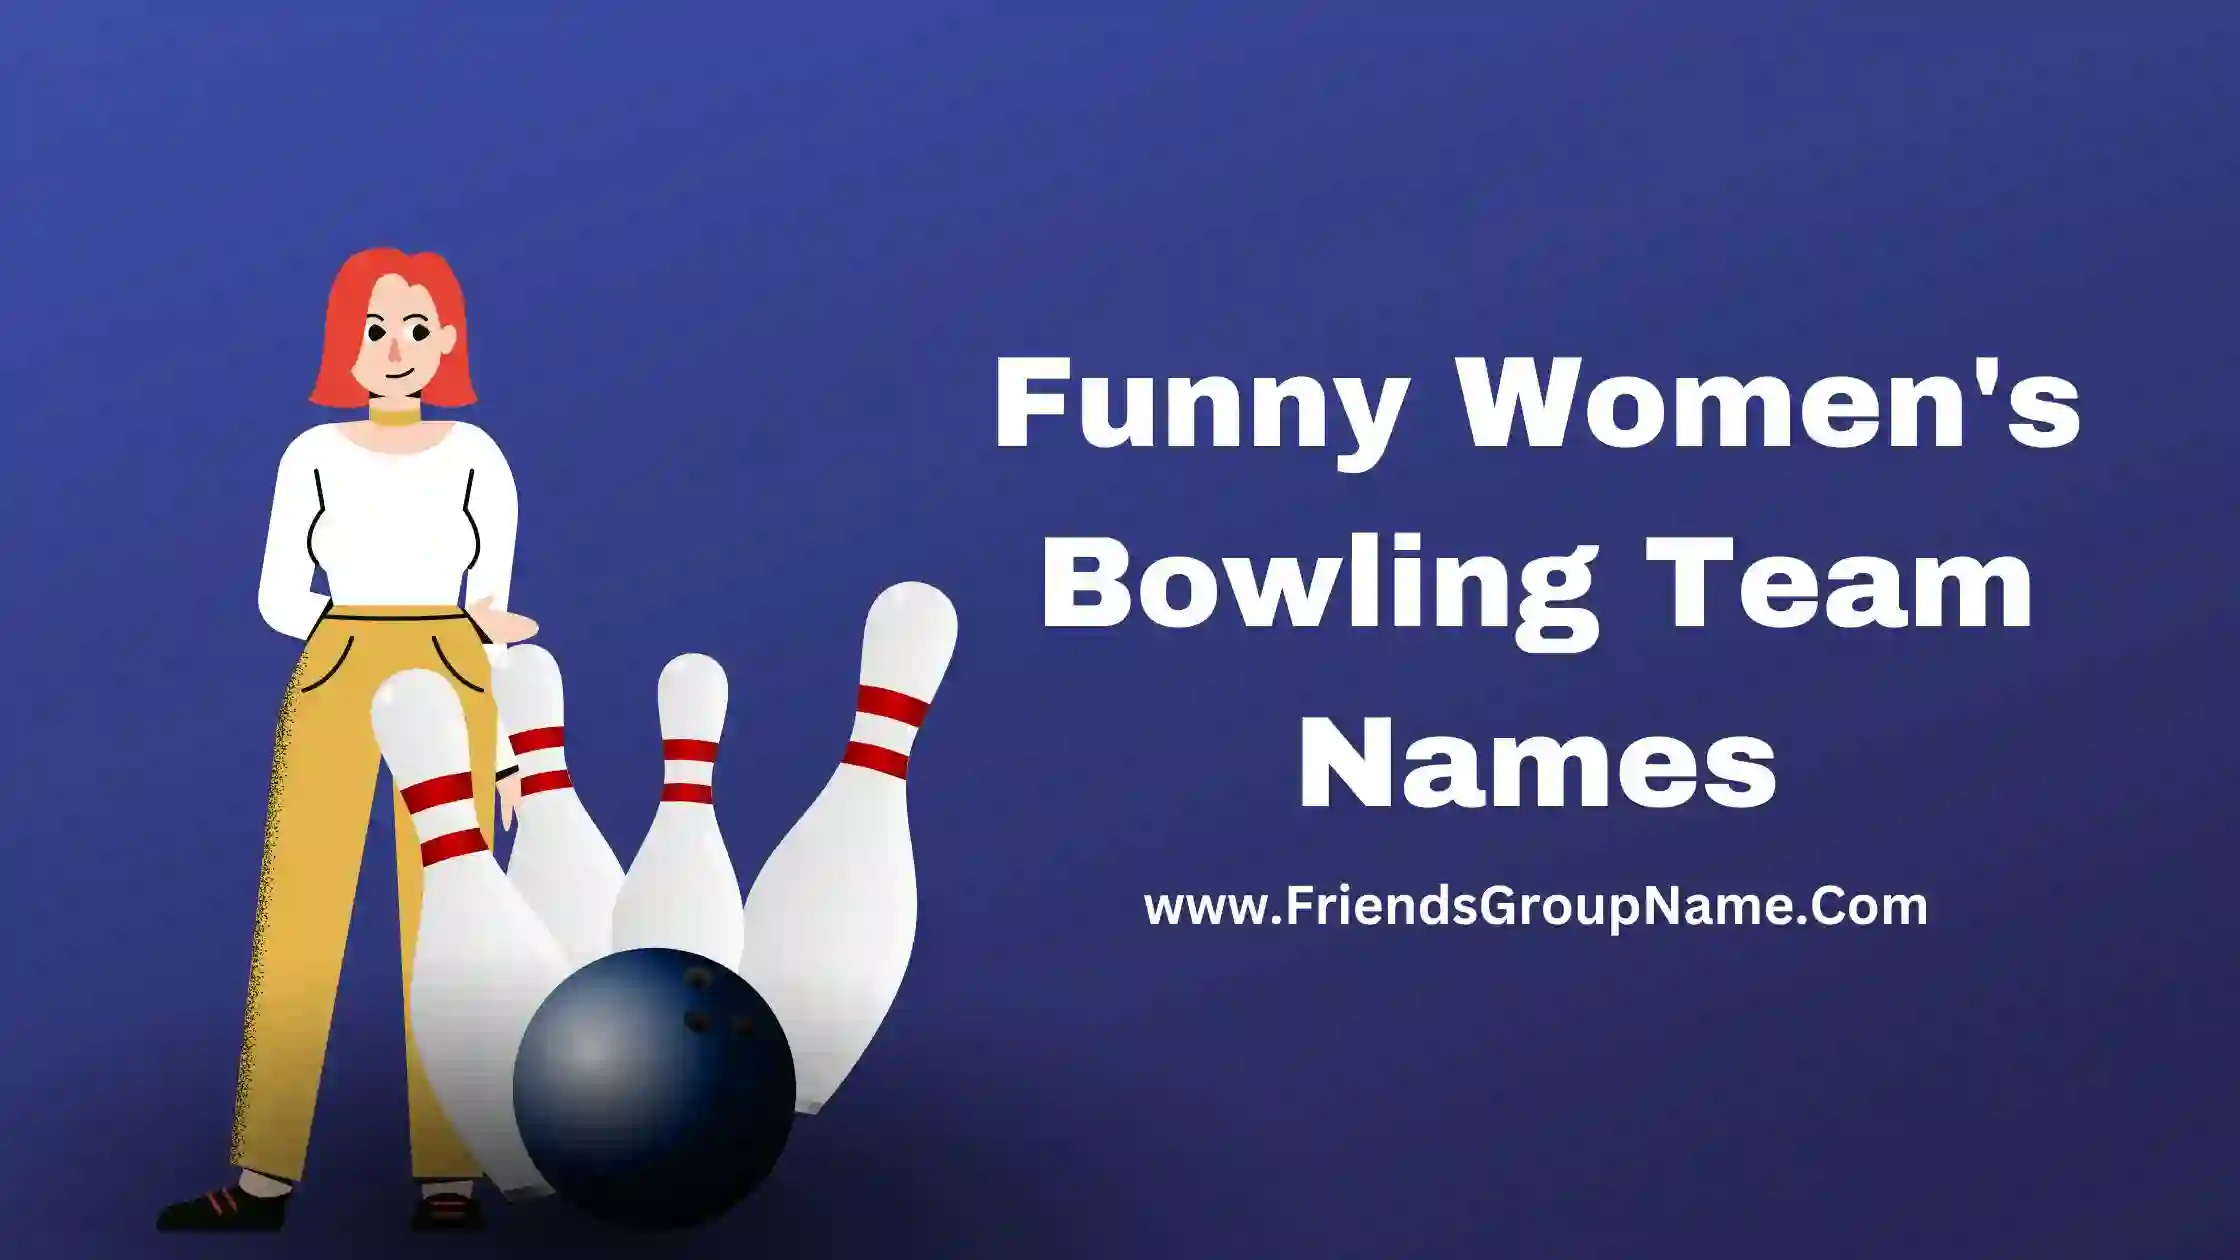 Funny Women's Bowling Team Names